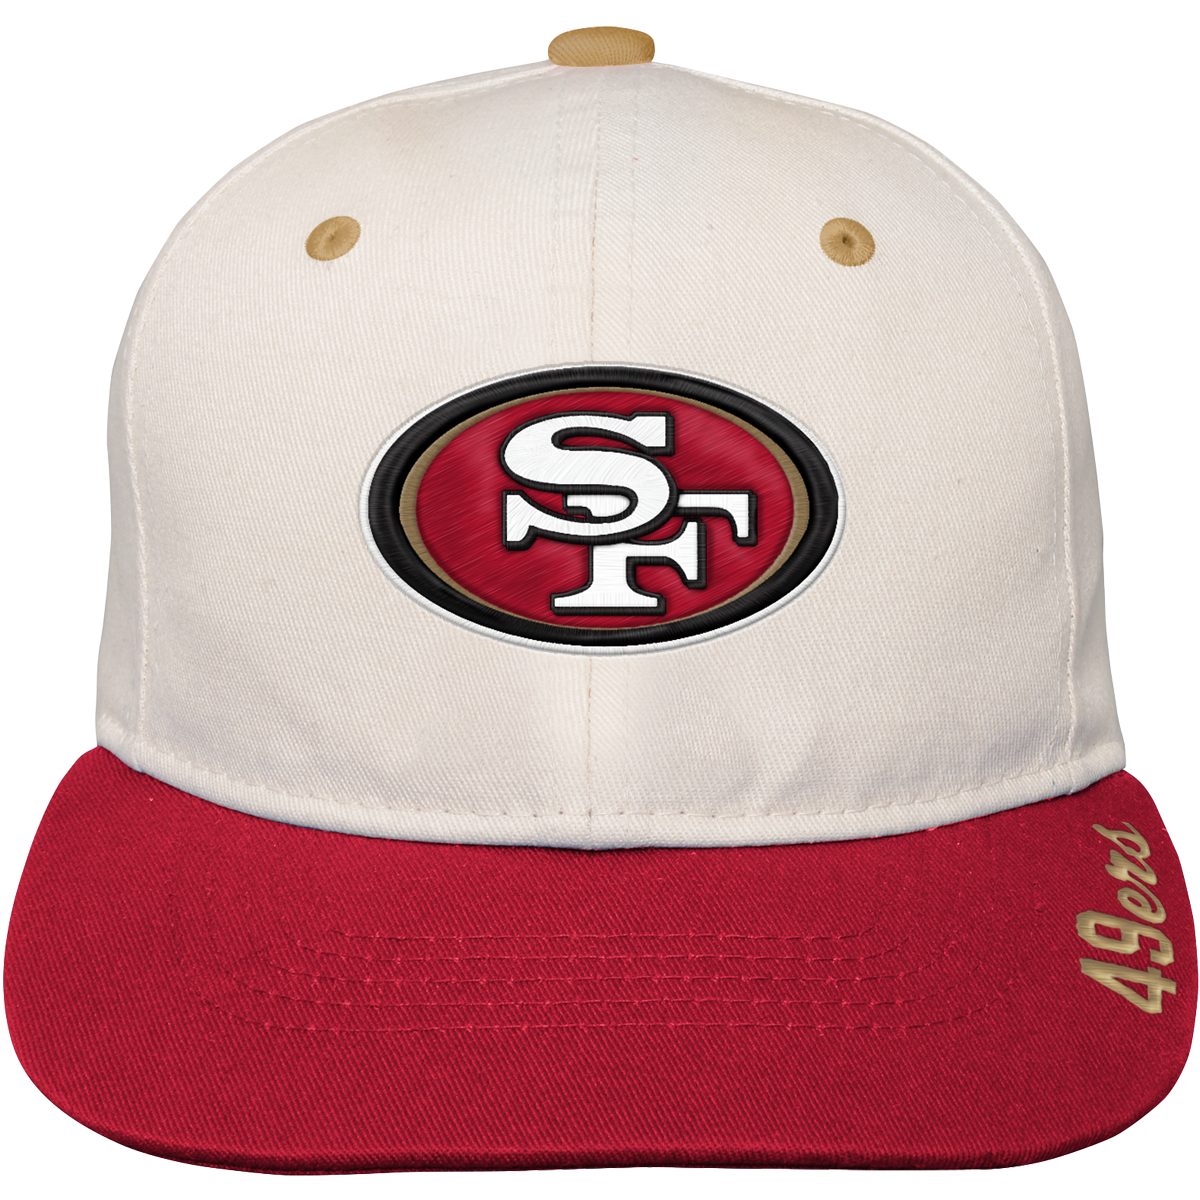 Youth 49ers Deadstock Snapback alternate view